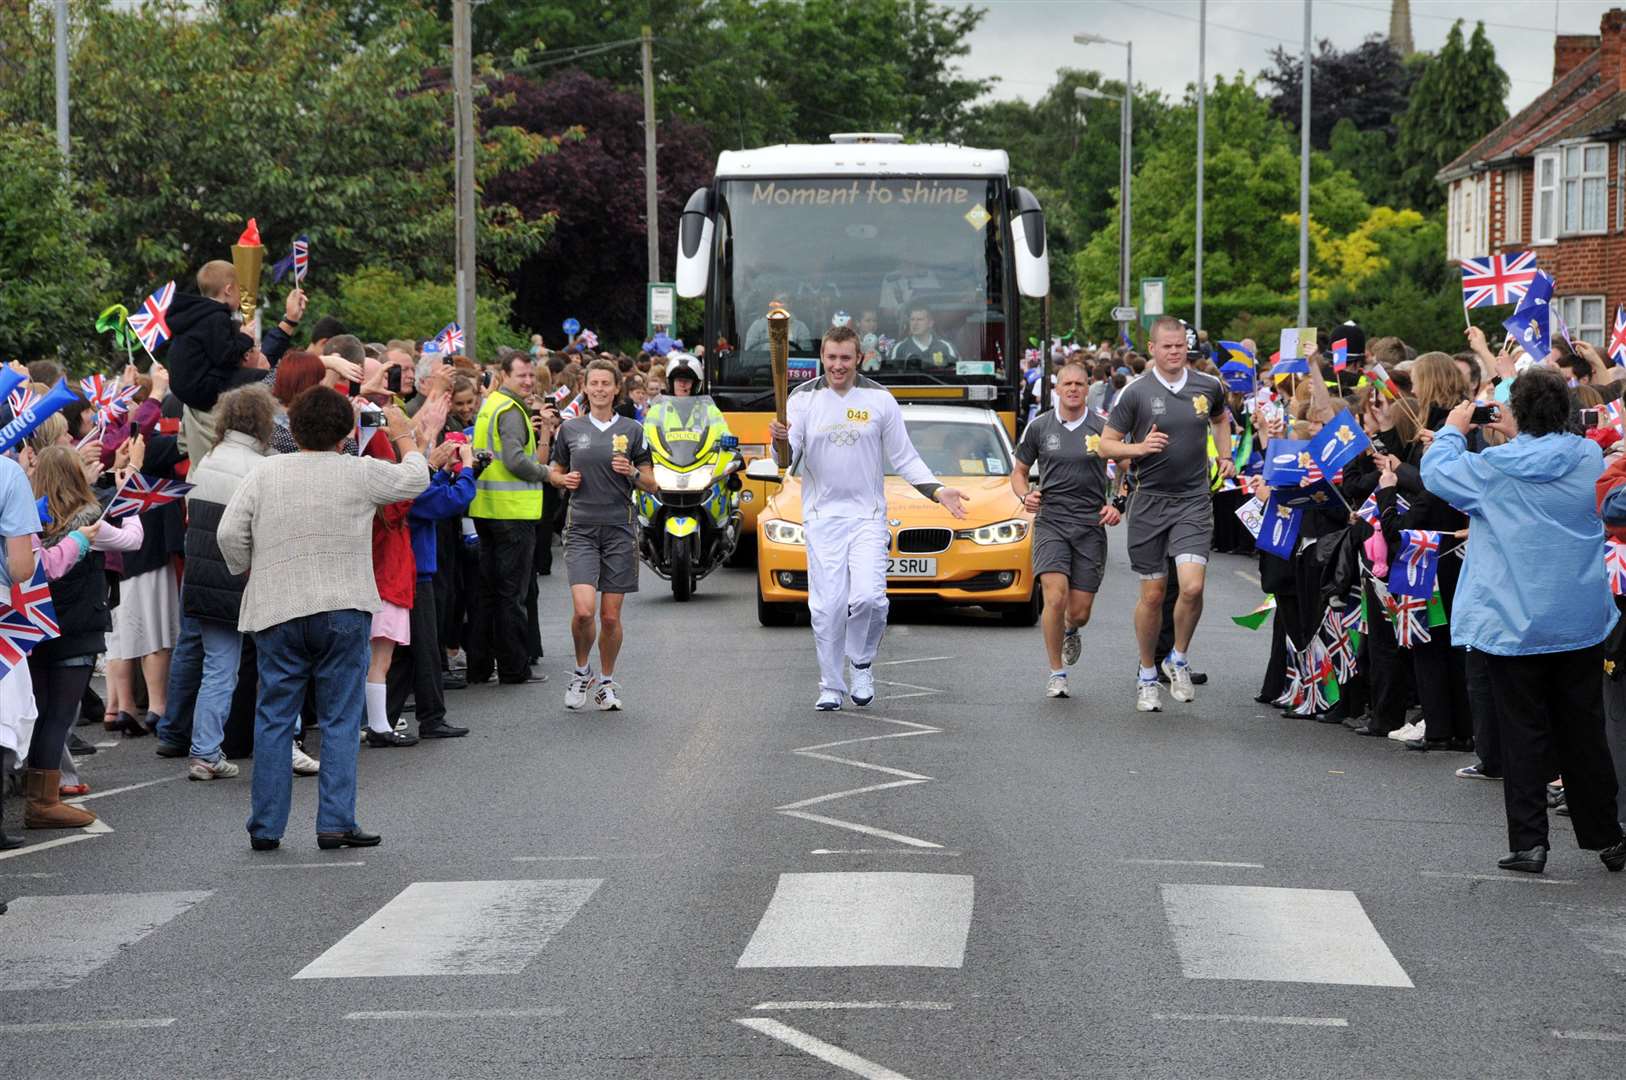 Olympic torch comes to county